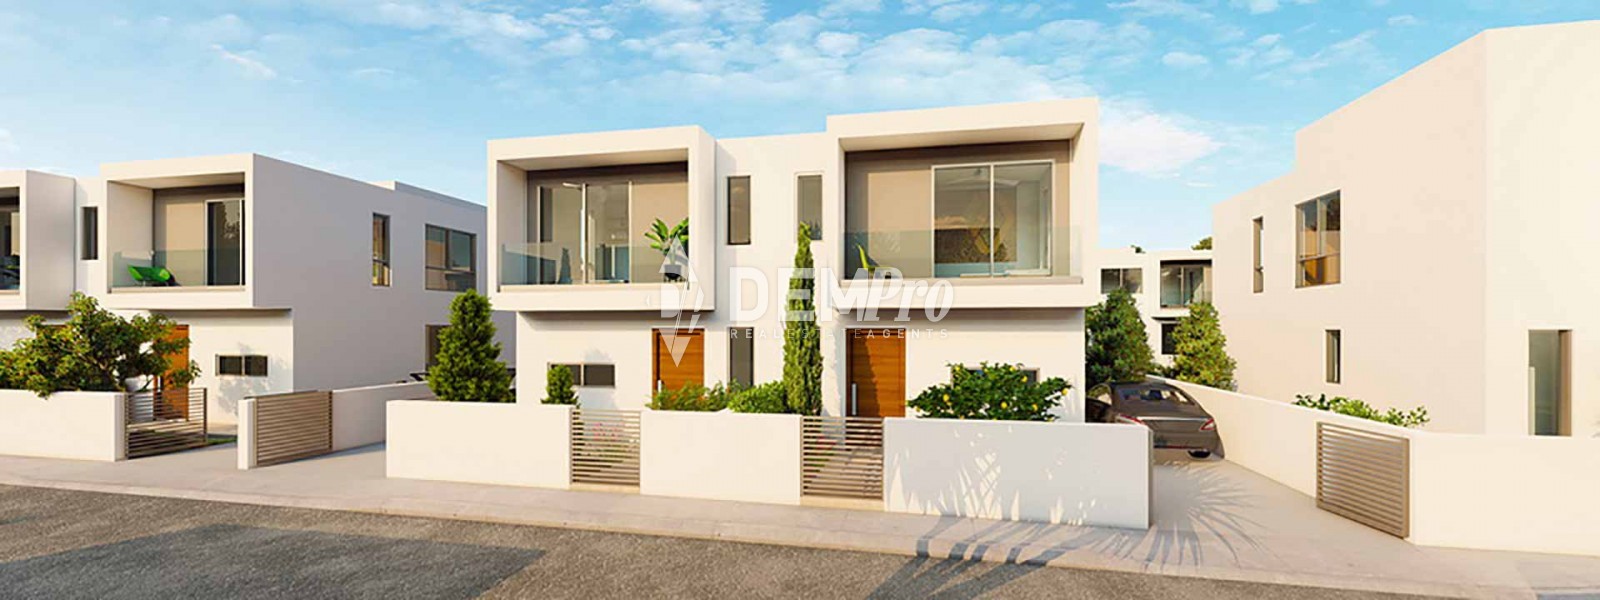 3 Bedroom House for Sale in Mandria, Paphos District